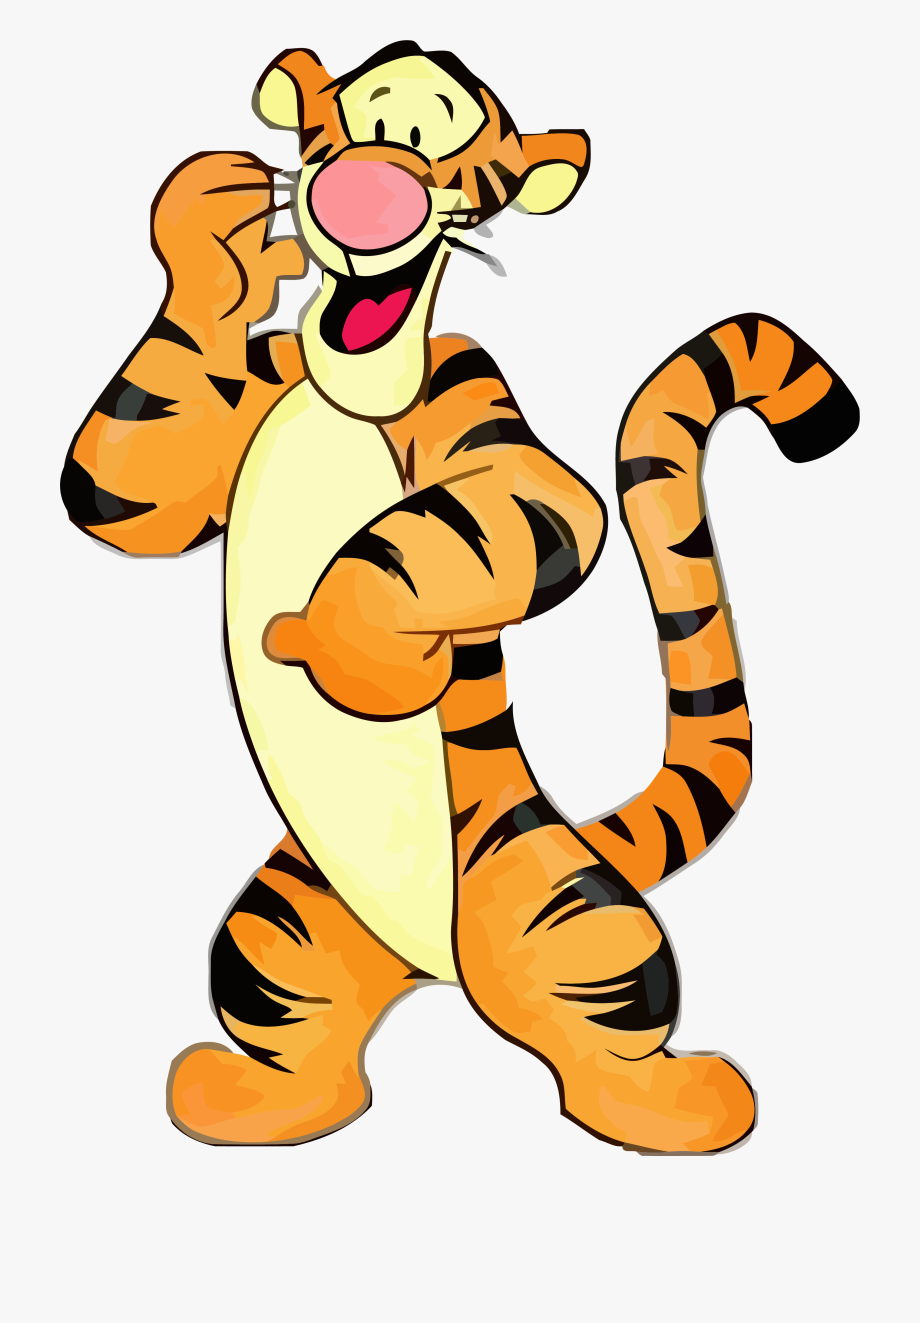 Clip Arts Related To : tigger winnie the pooh drawings. view all tigger-cli...